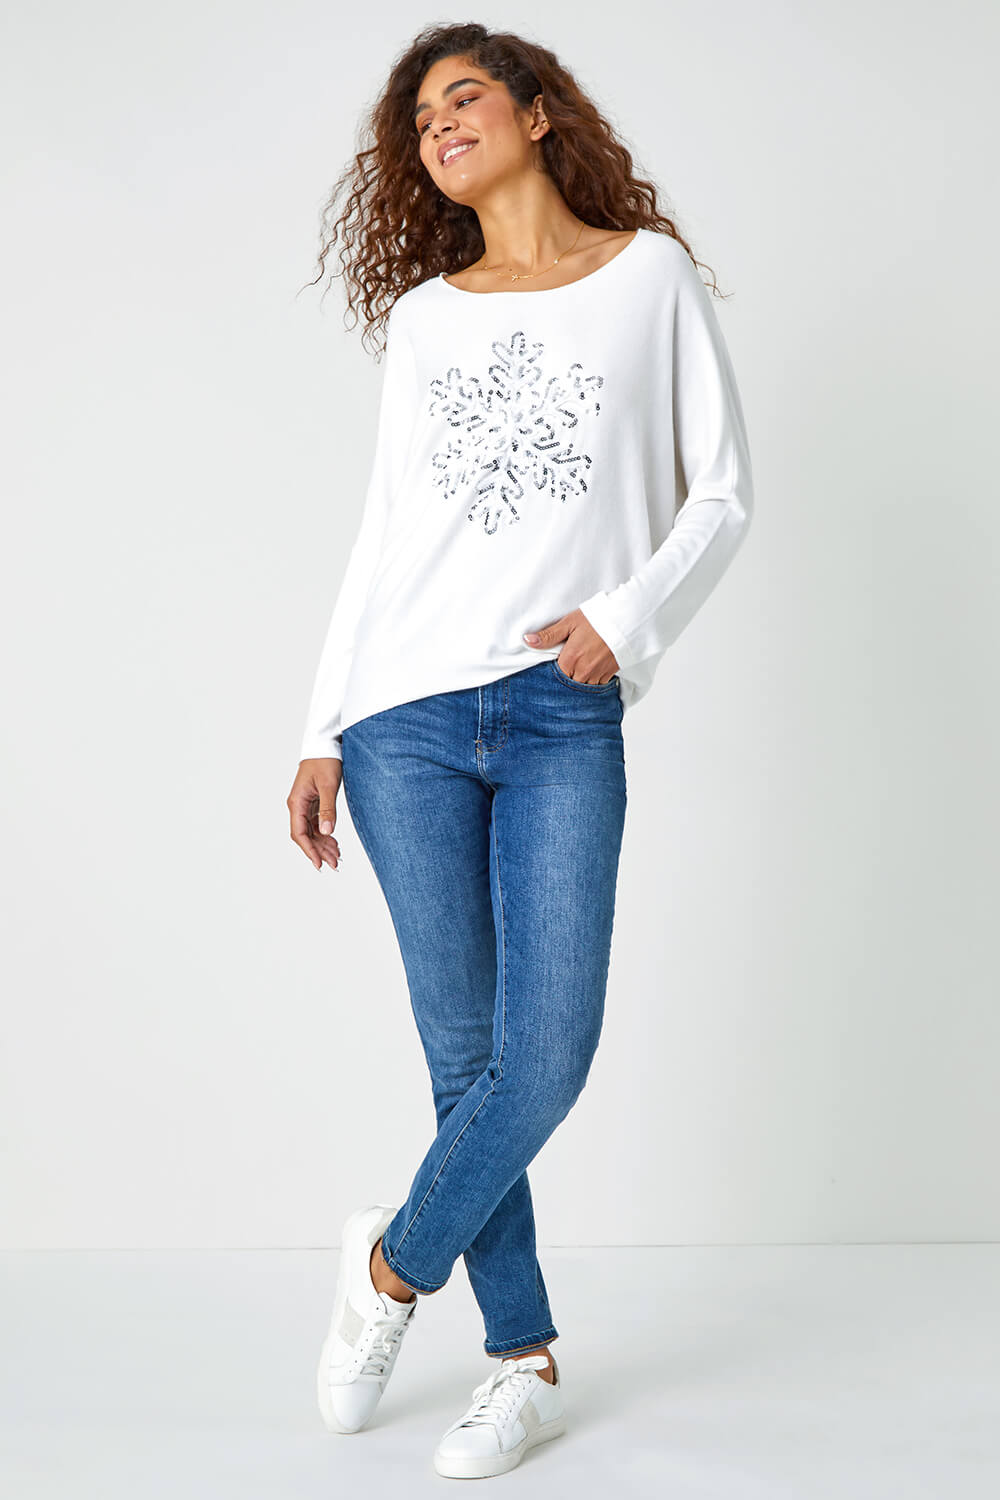 Ivory  Embellished Snowflake Stretch Top, Image 2 of 5